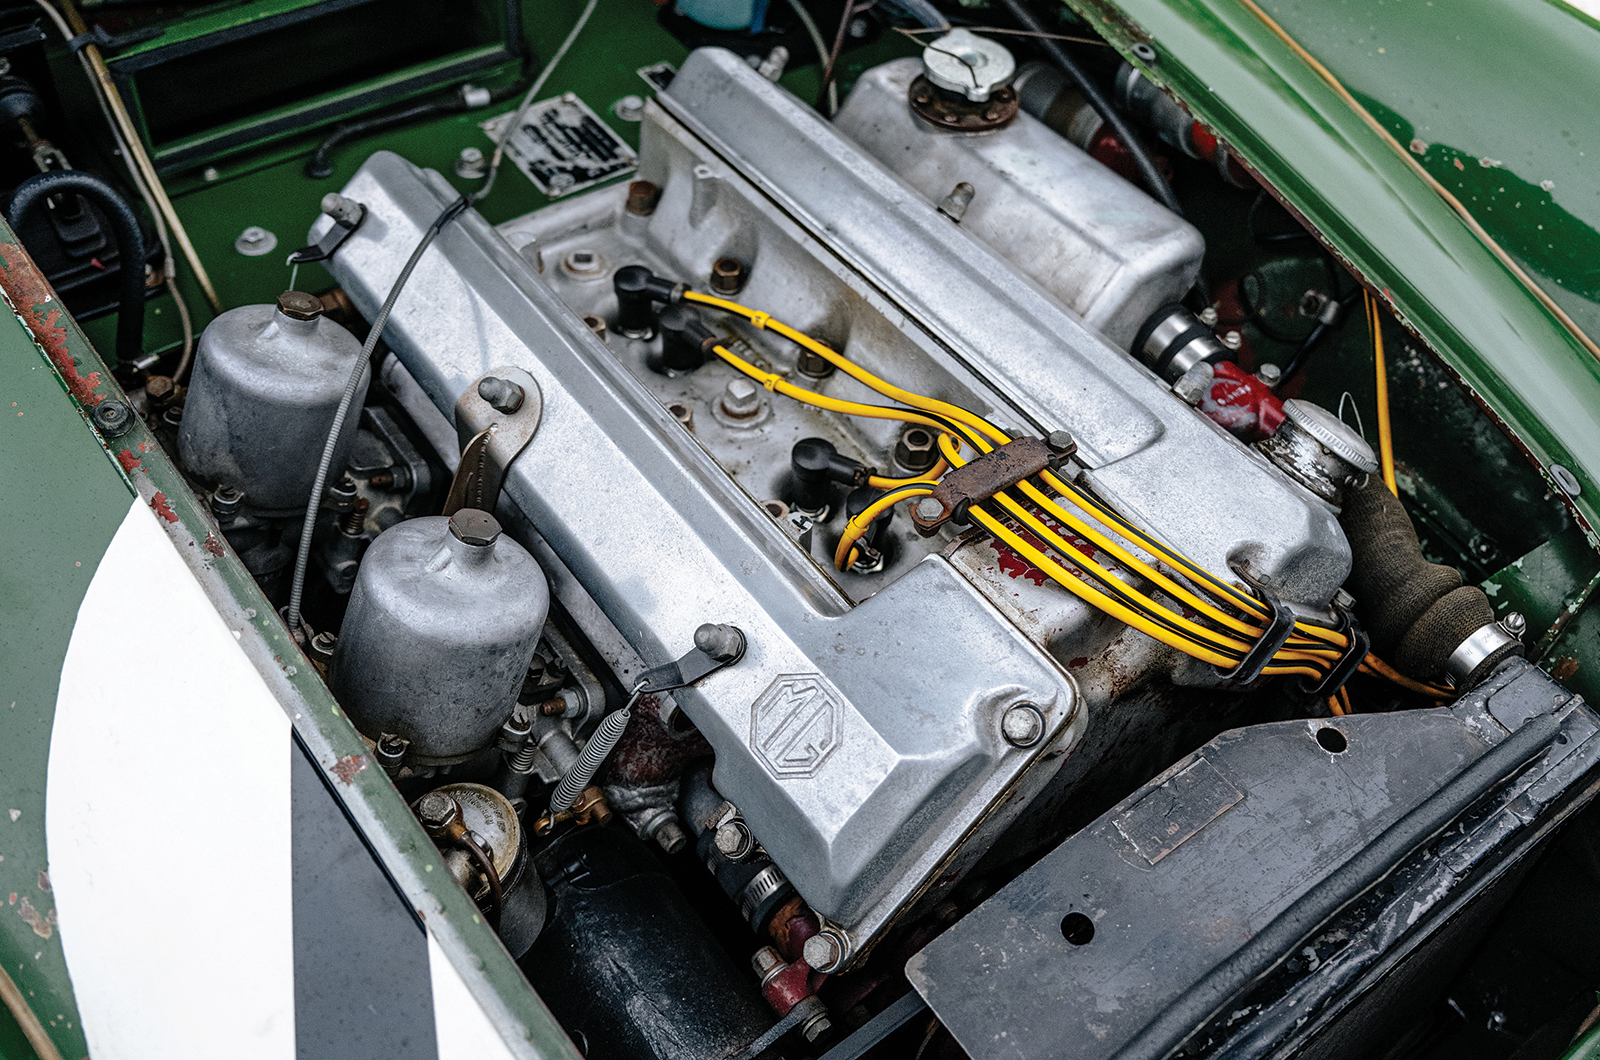 Classic & Sports Car – MGA Twin Cam: on track in an ex-works racer